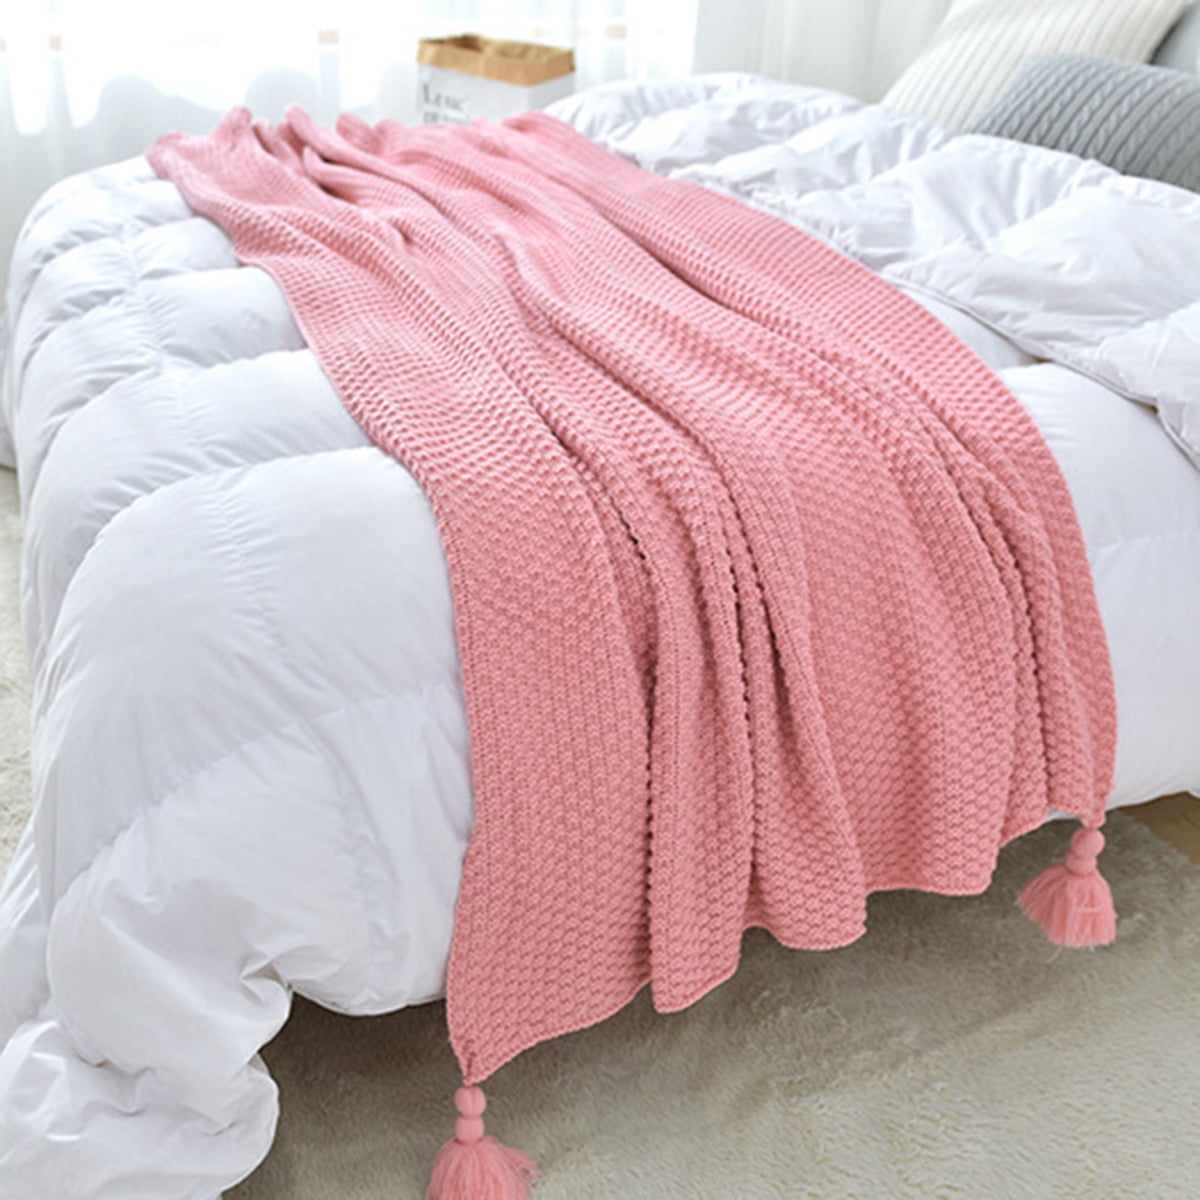 50x60 Inches Pink Knitted Woven Blanket for Ladies Texture Blanket for Sofa Bed Sofa Travel Men and Children Fringed Decorative Blanket NC Knitted Blanket